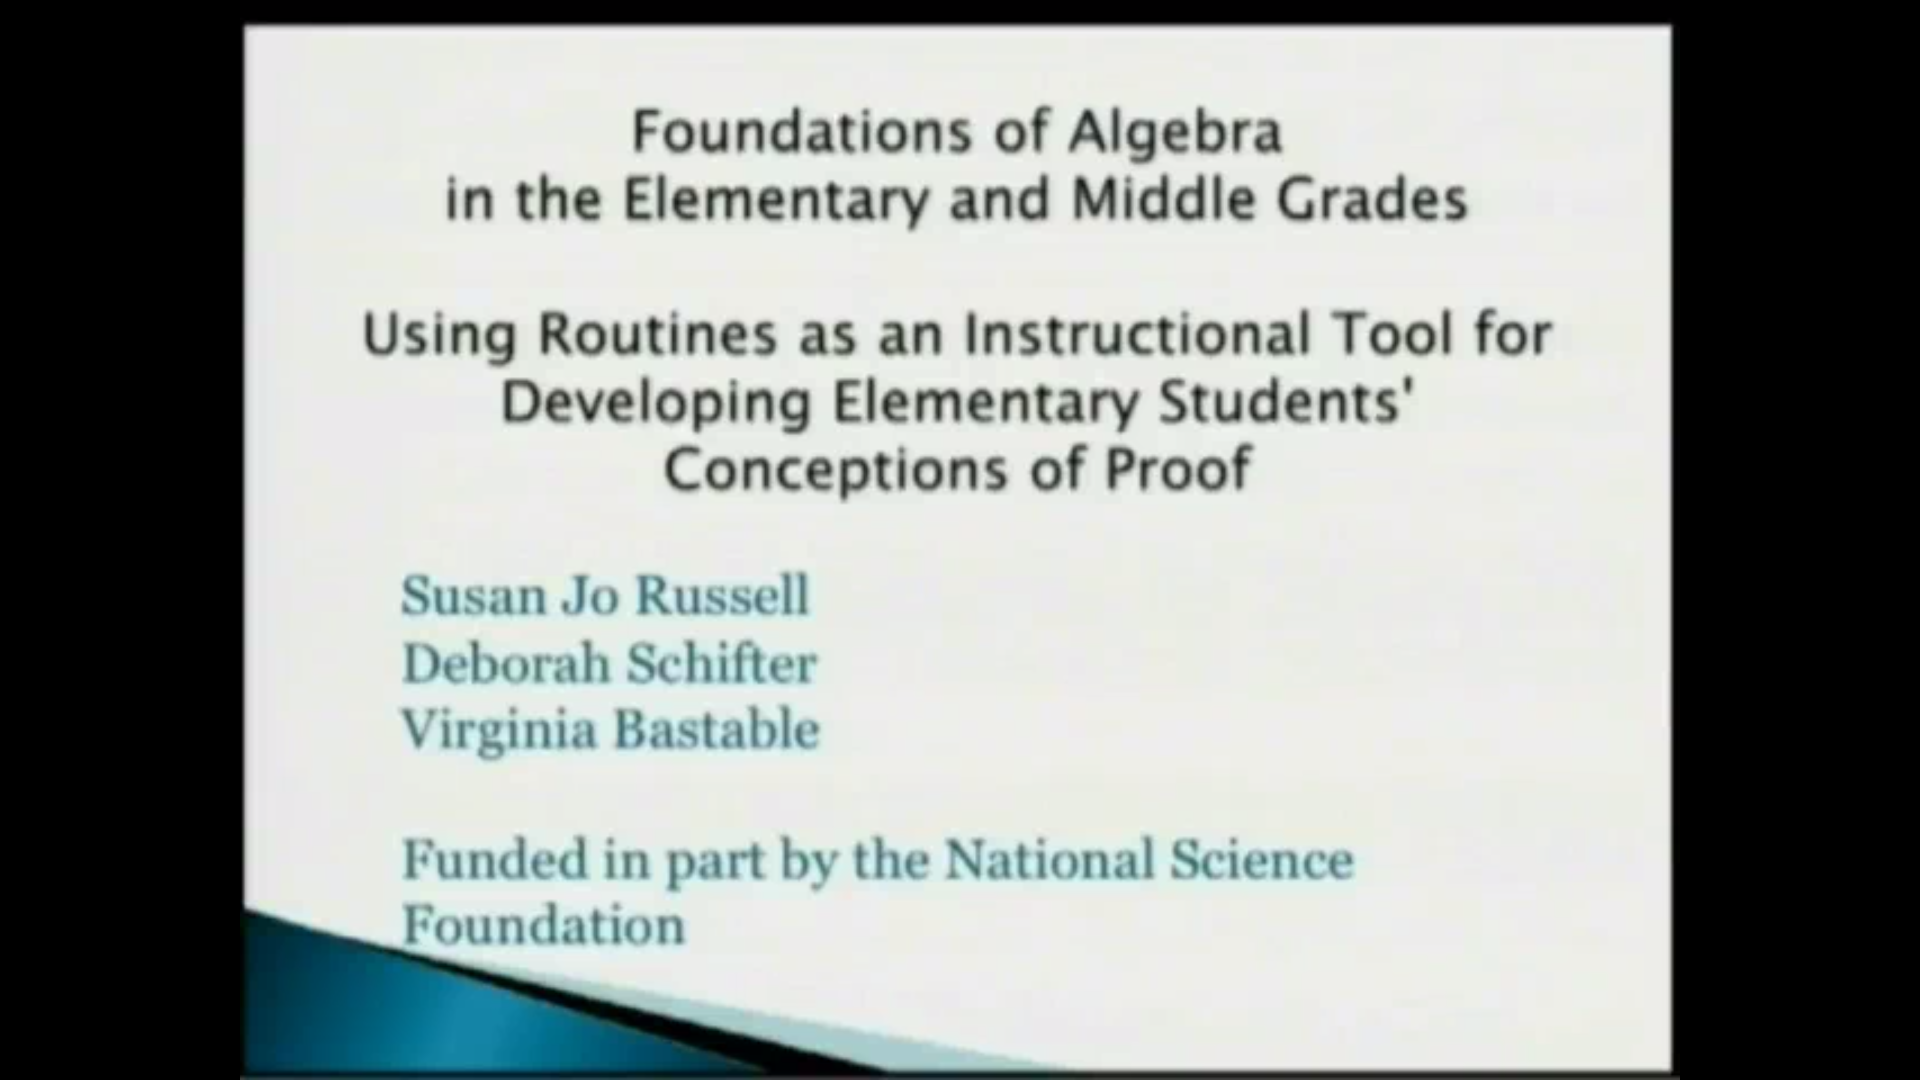 Critical Issues In Mathematics Education 2011: Mathematical Education of Teachers, lecture 7 - Early Algebra and the Common Core: What Do Teachers Need to Know? Thumbnail